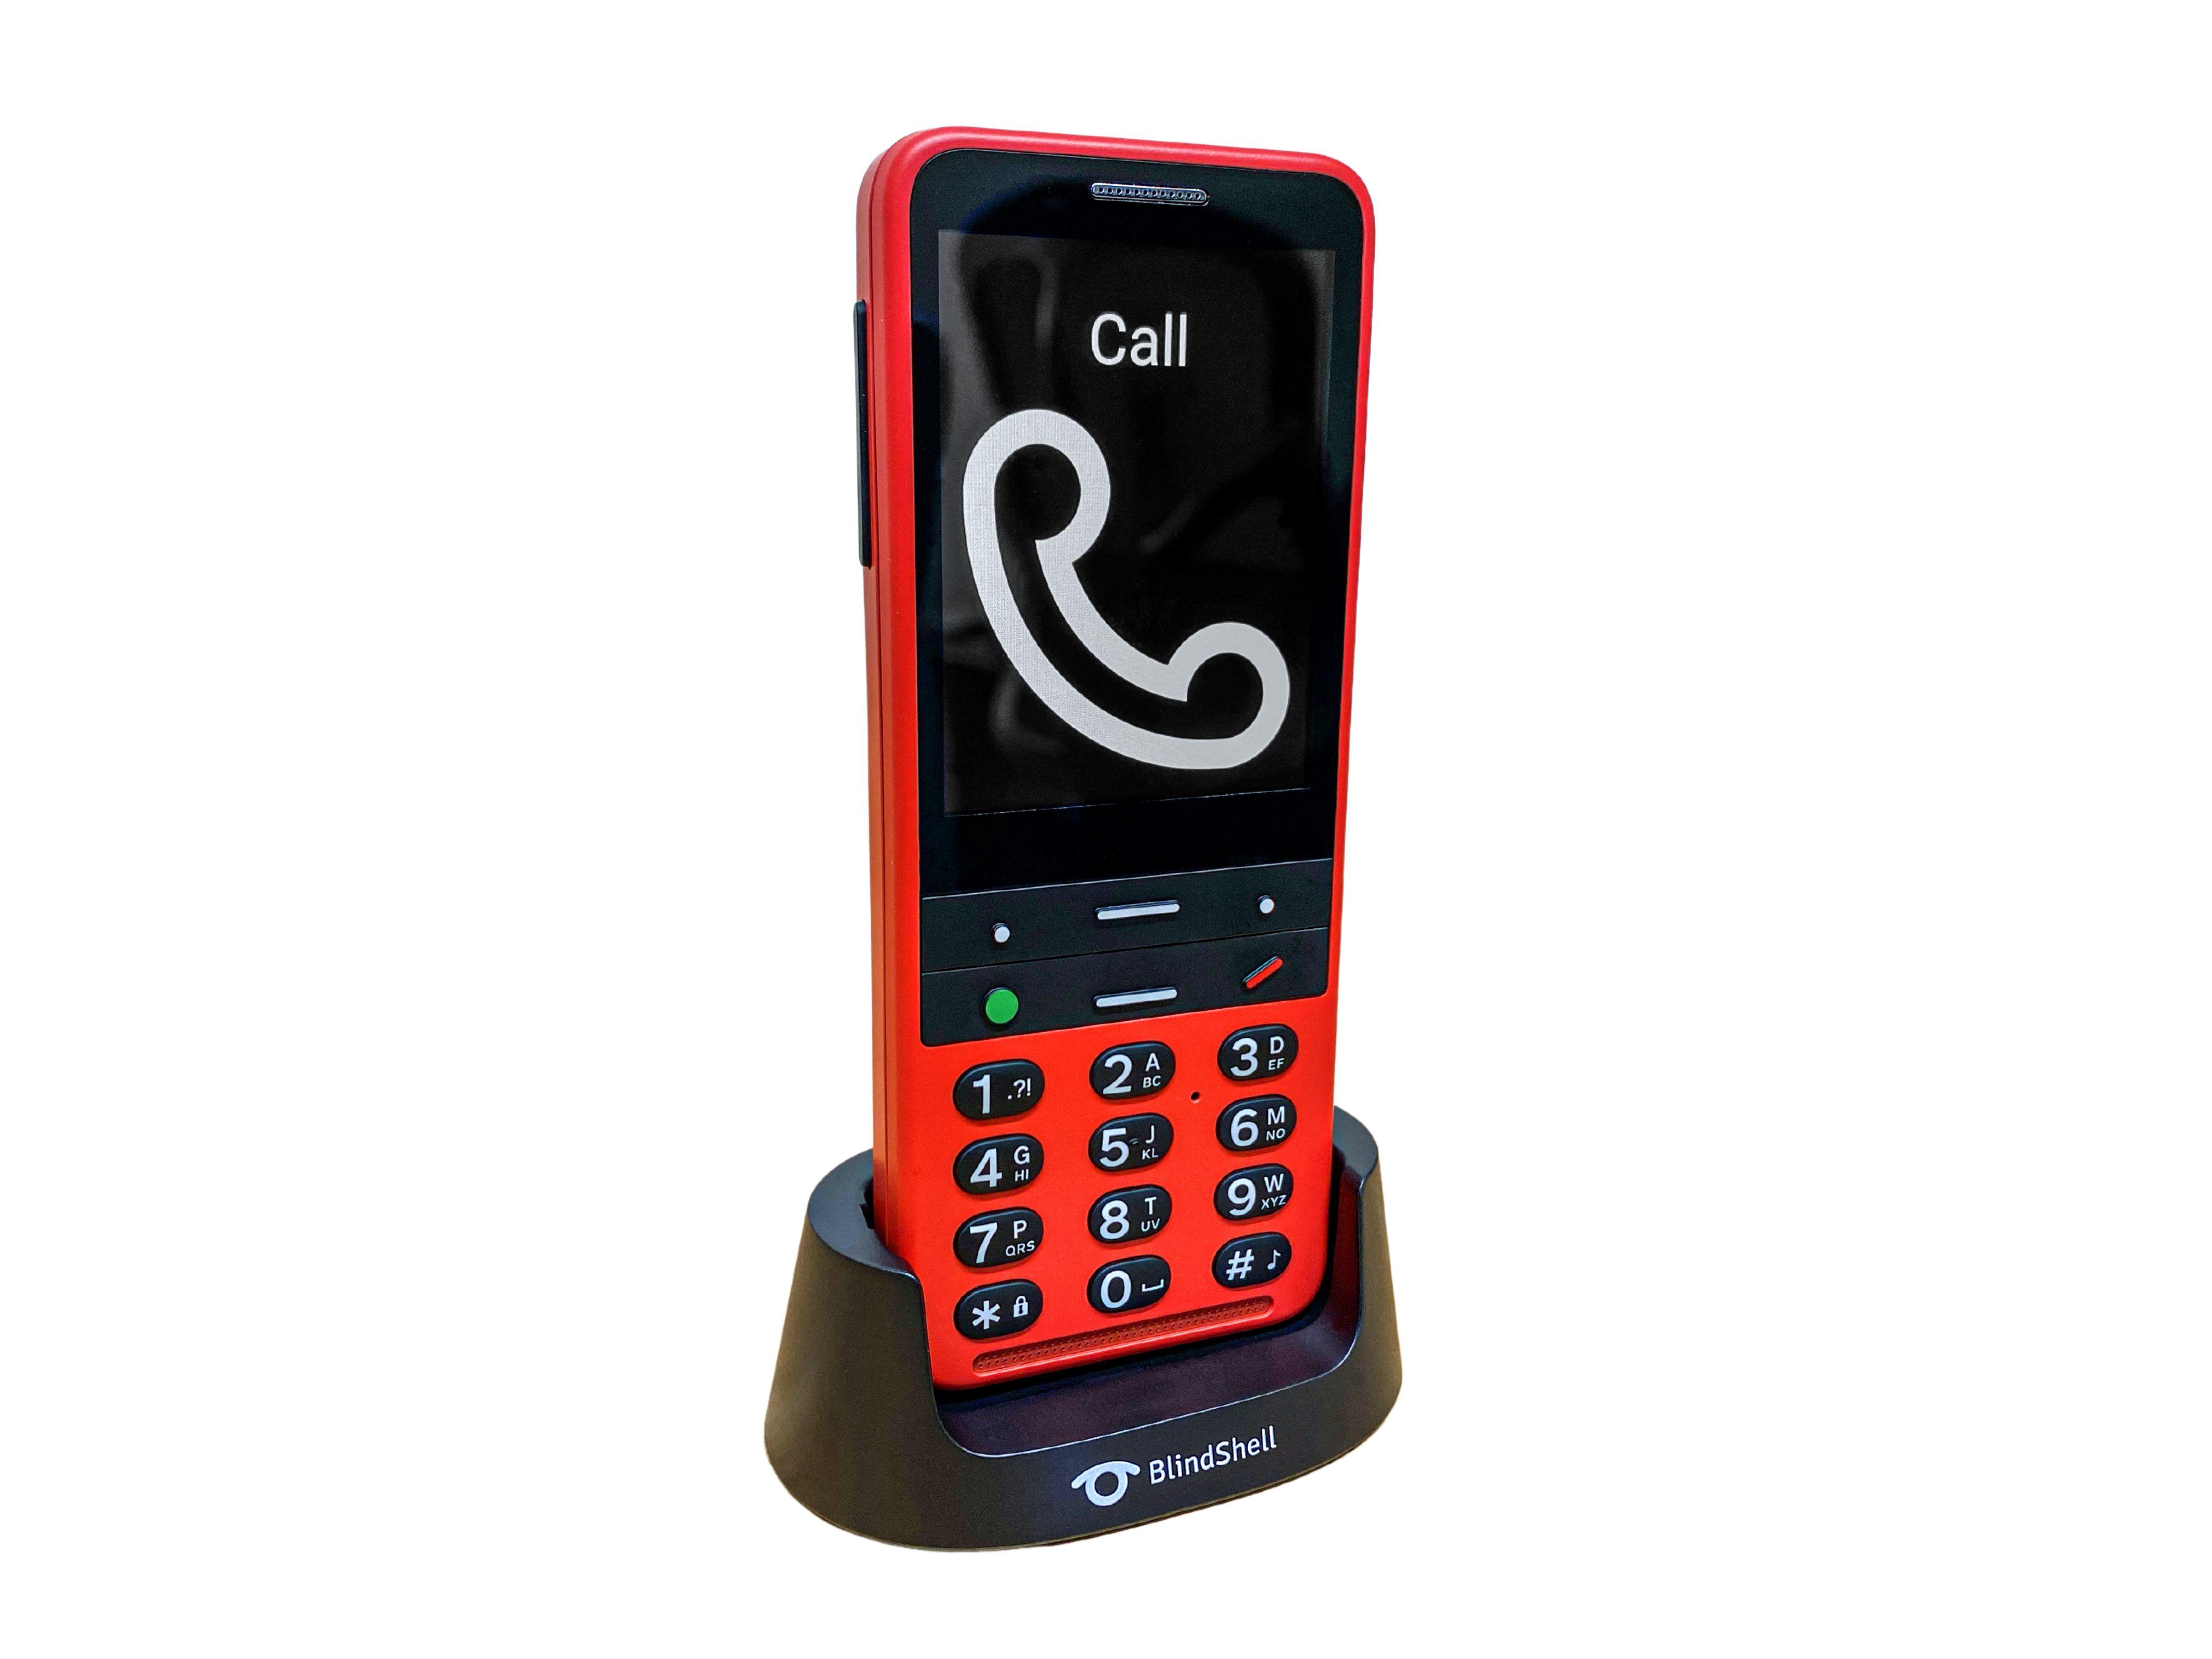 BlindShell Classic 2 in red shown in its cradle and with the screen showing call